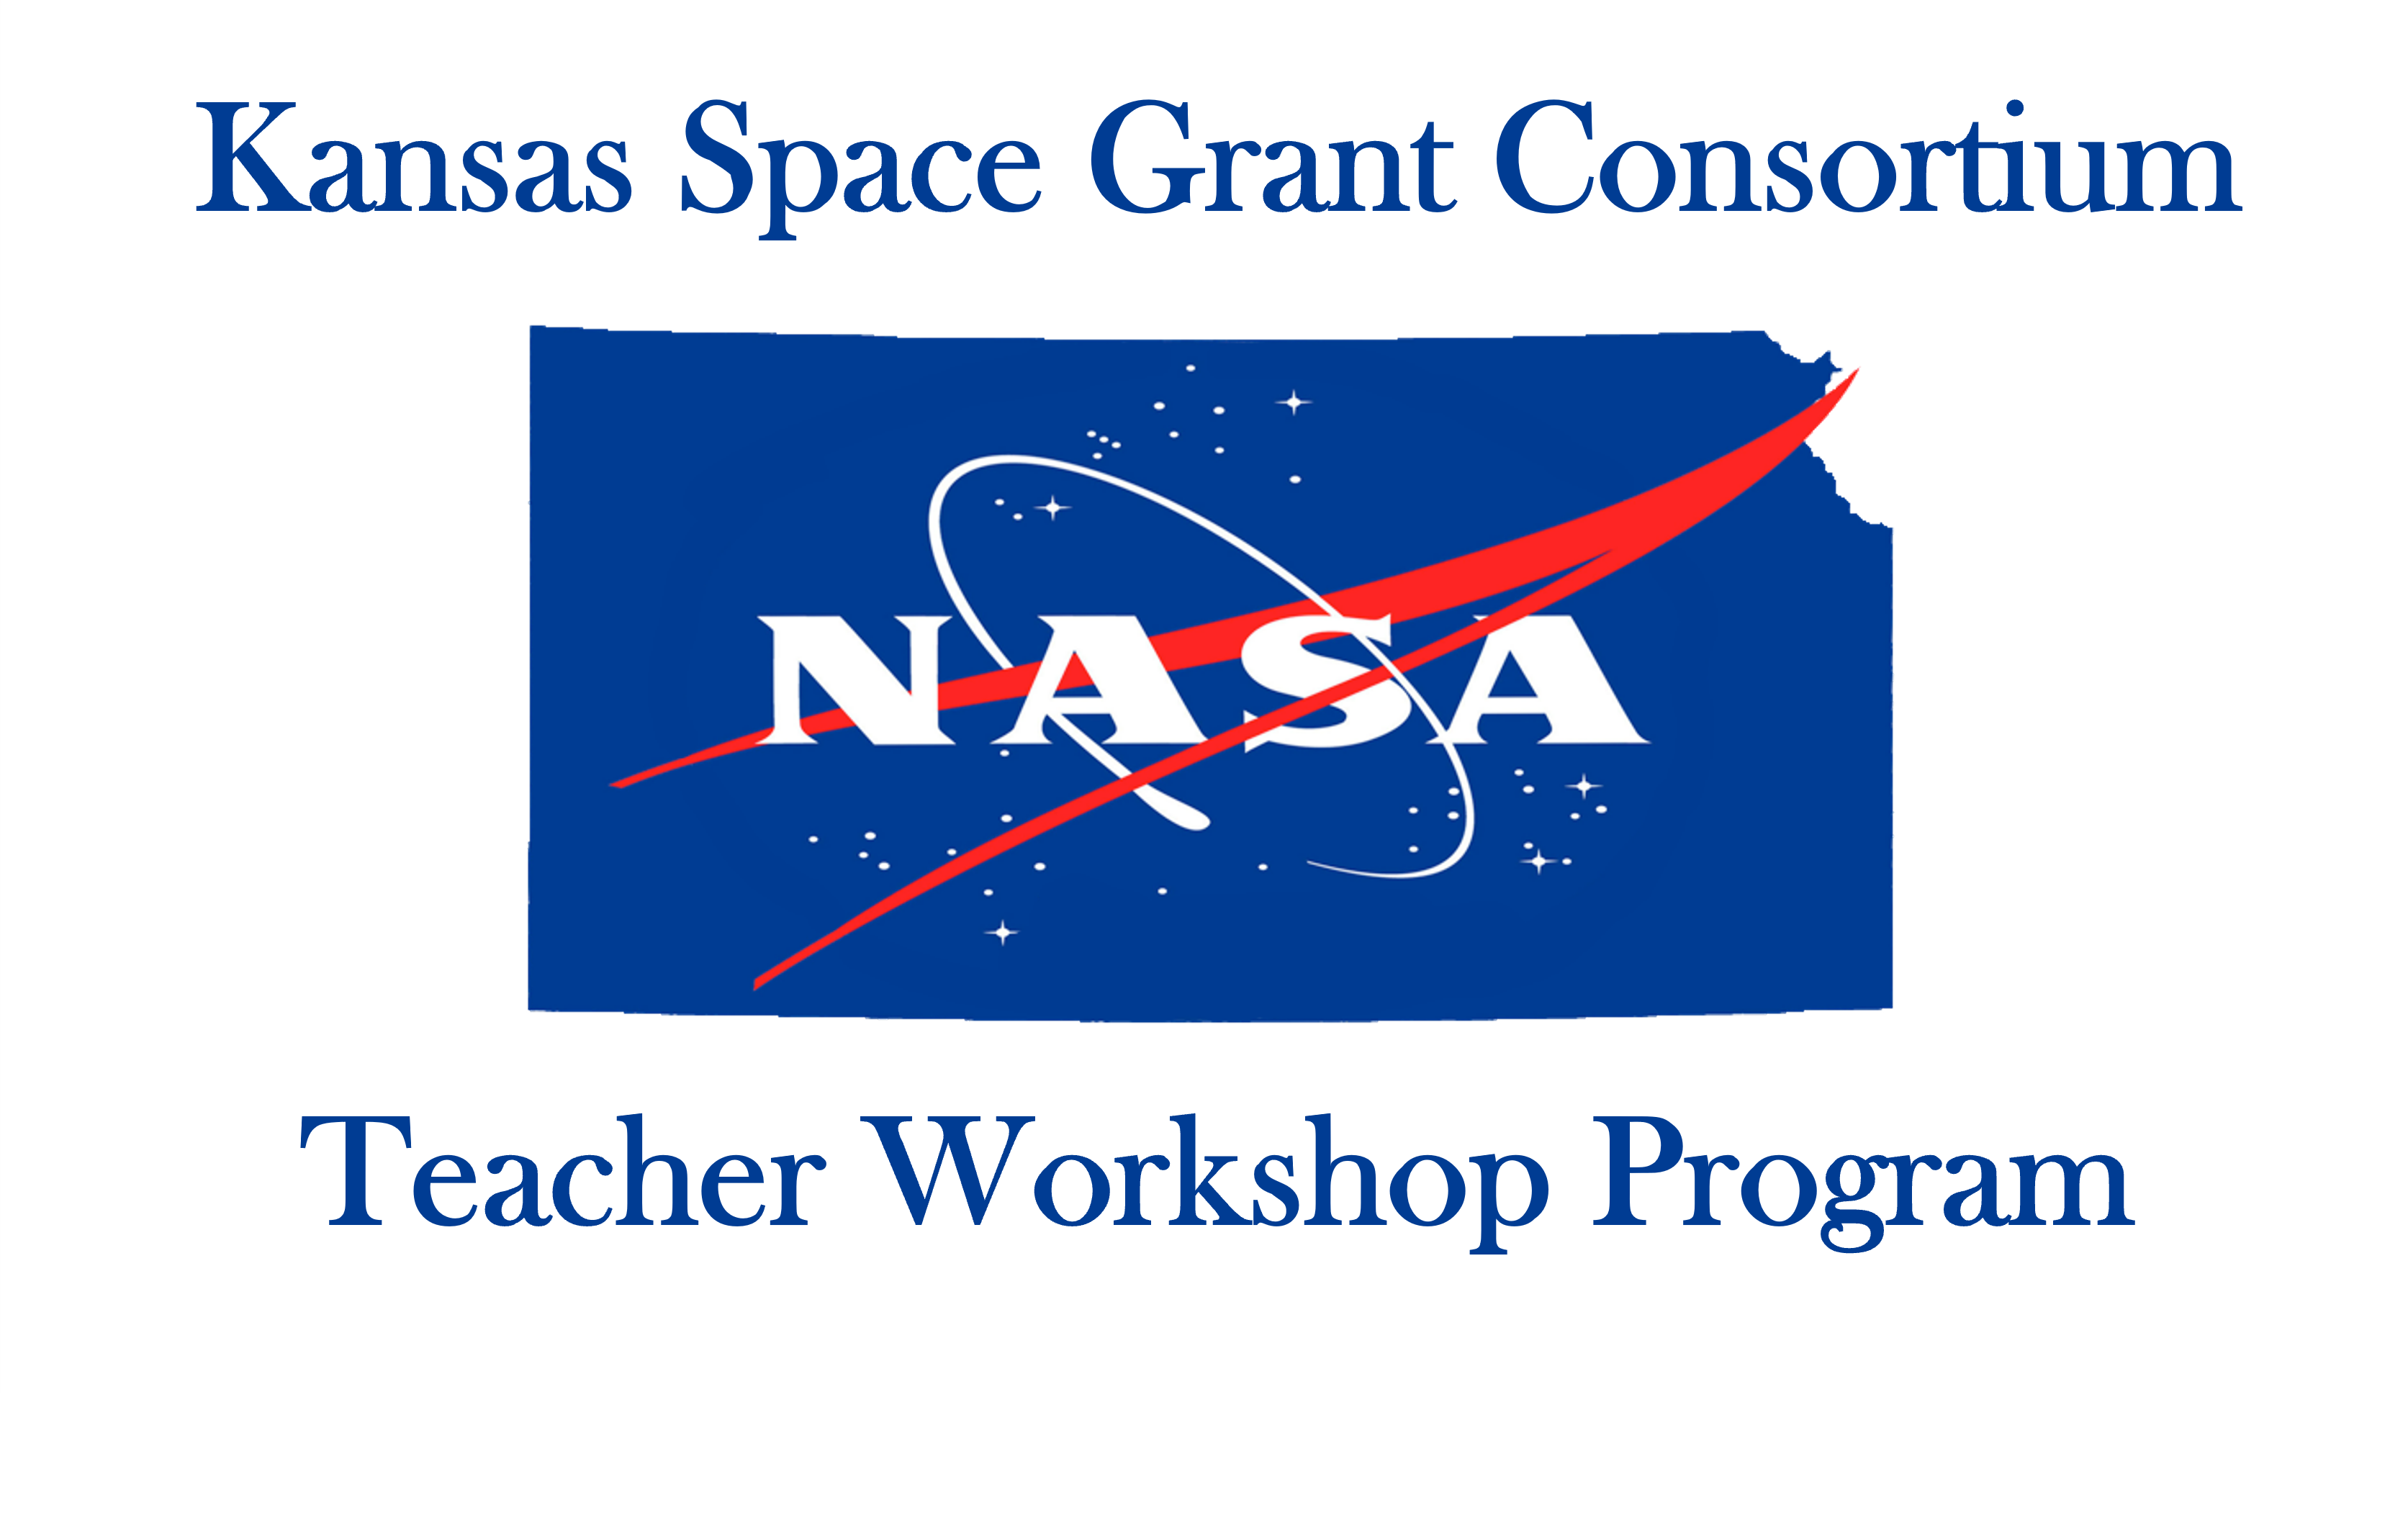 Graphic of the NASA logo embedded within the shape of Kansas and the text, "Kansas Space Grant Consortium | NASA | Teacher Workshop Program